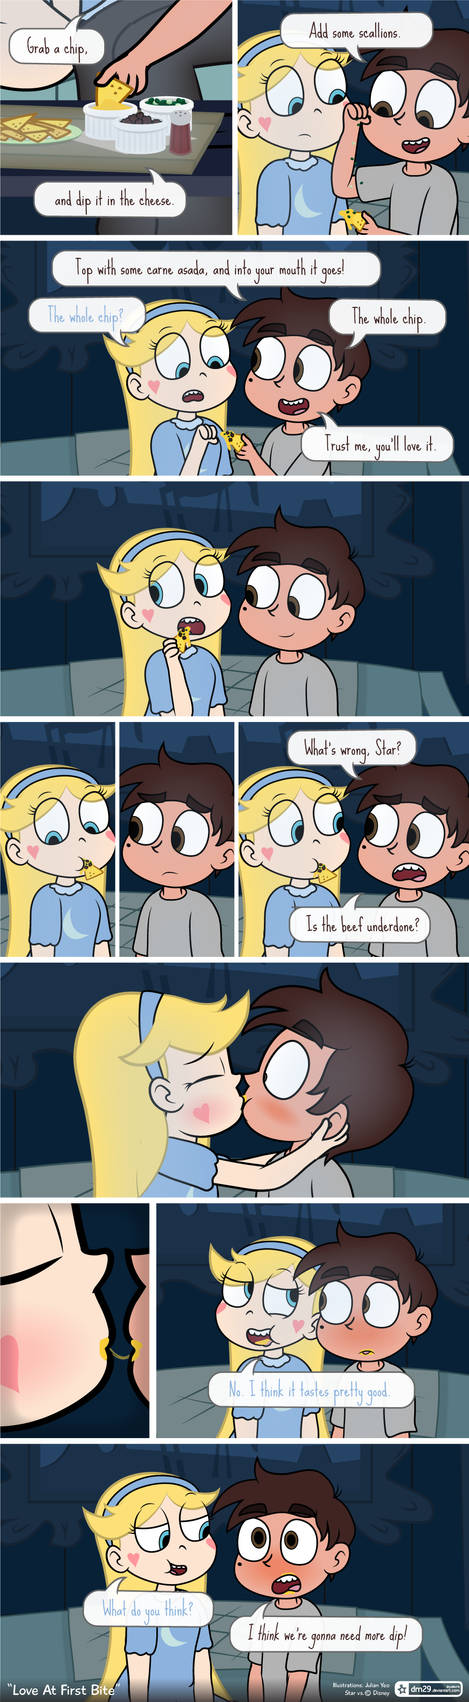 Love At First Bite Comic Love At First Bite by dm29 on DeviantArt